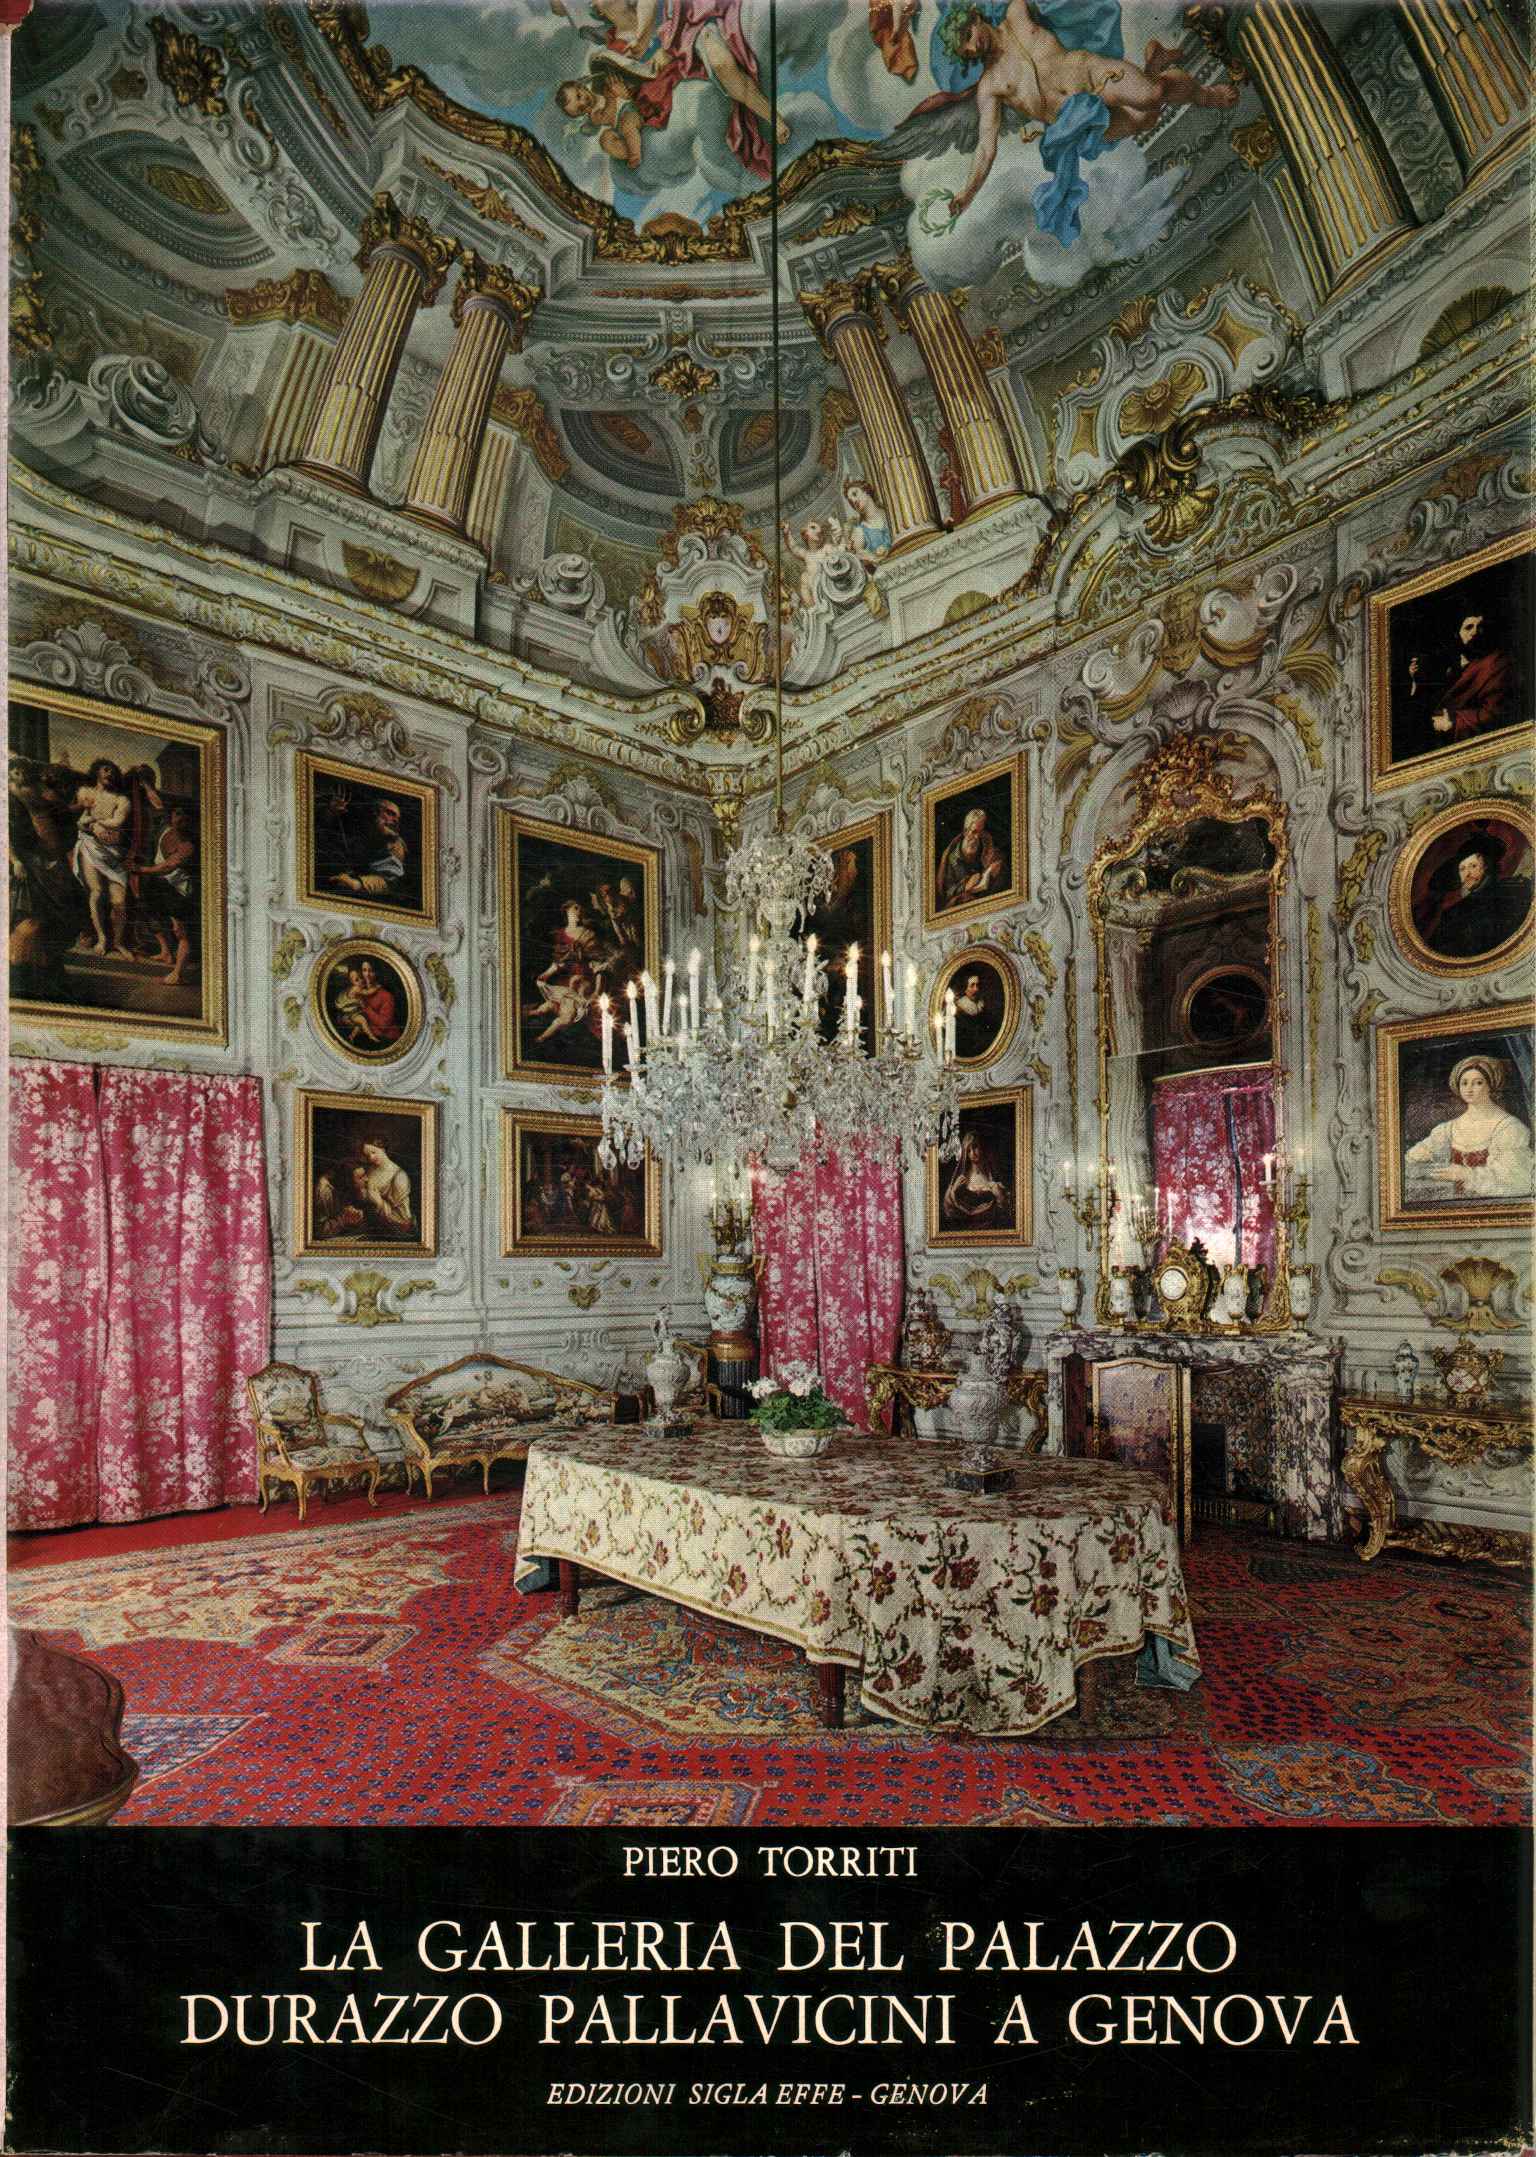 The gallery of the Durazzo Pallavic palace